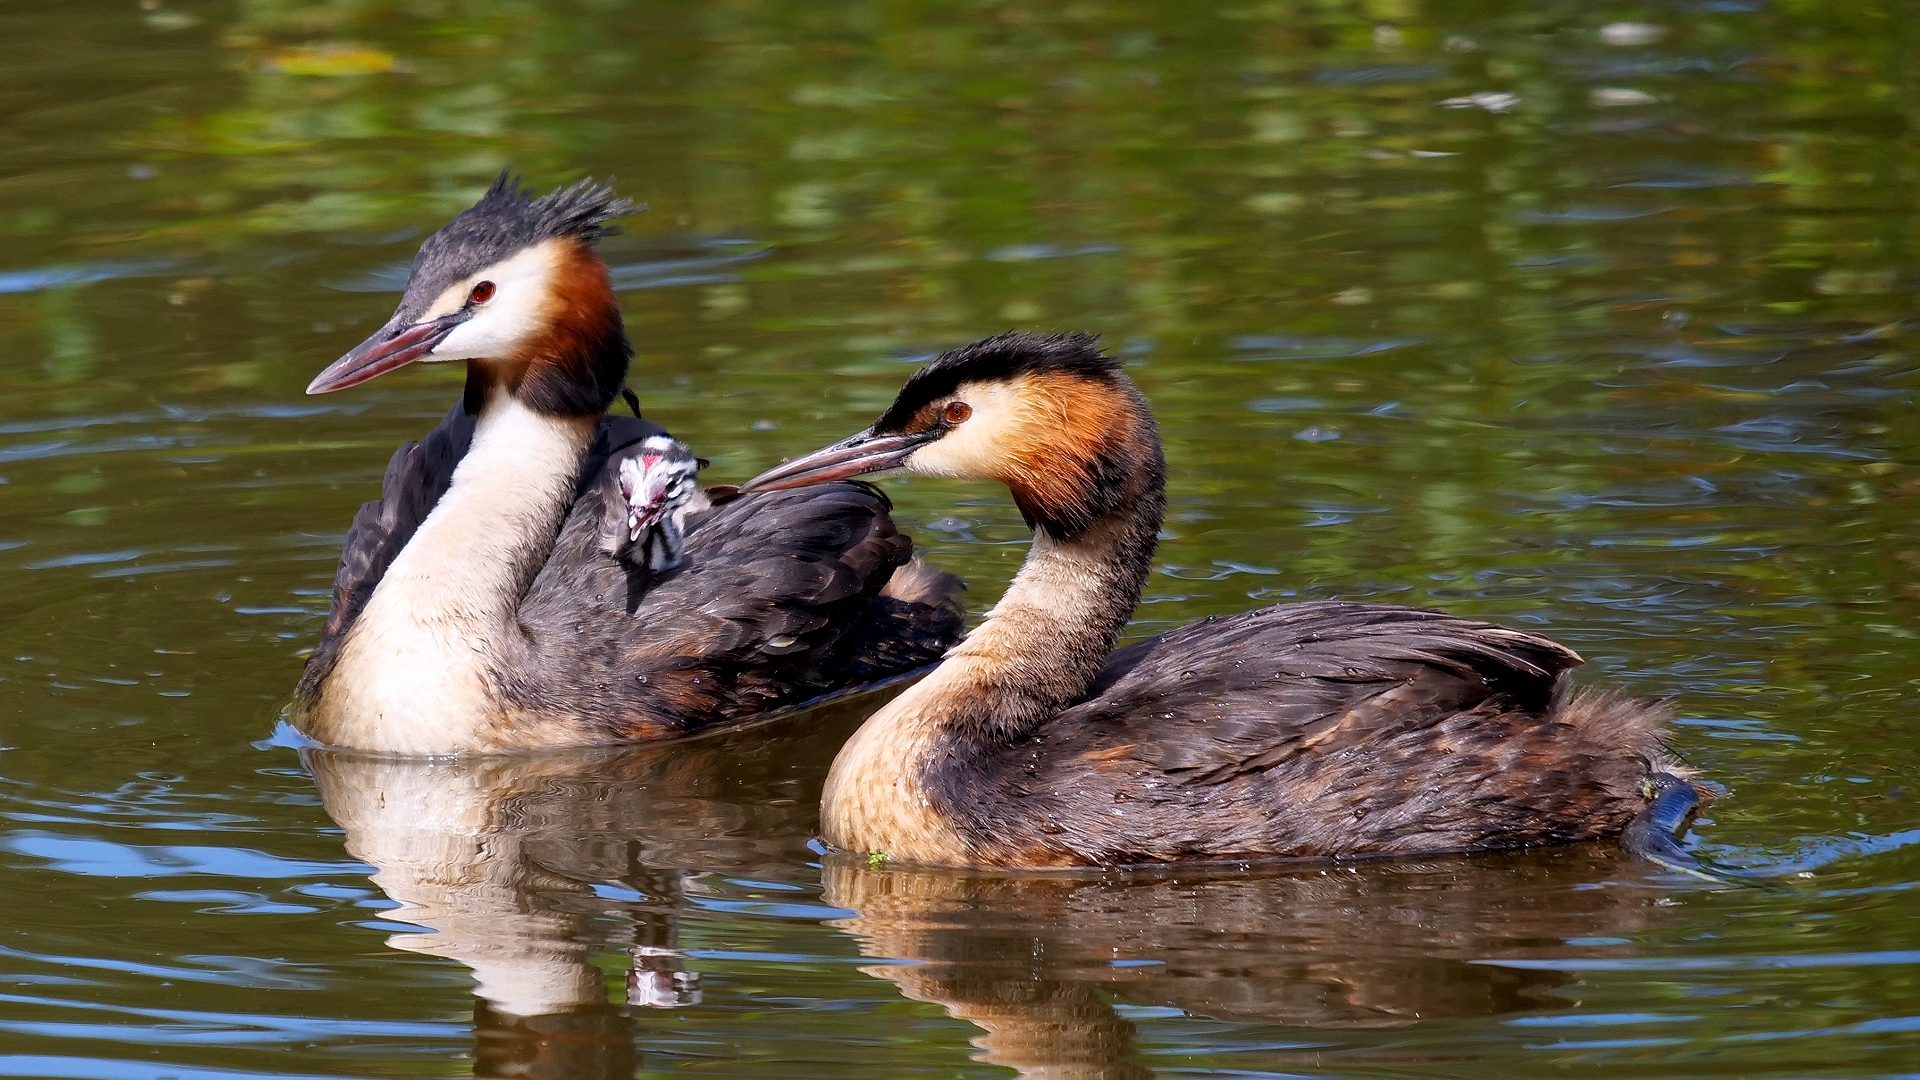 Great crested grebe family at Vale Royal locks by Russell Dean